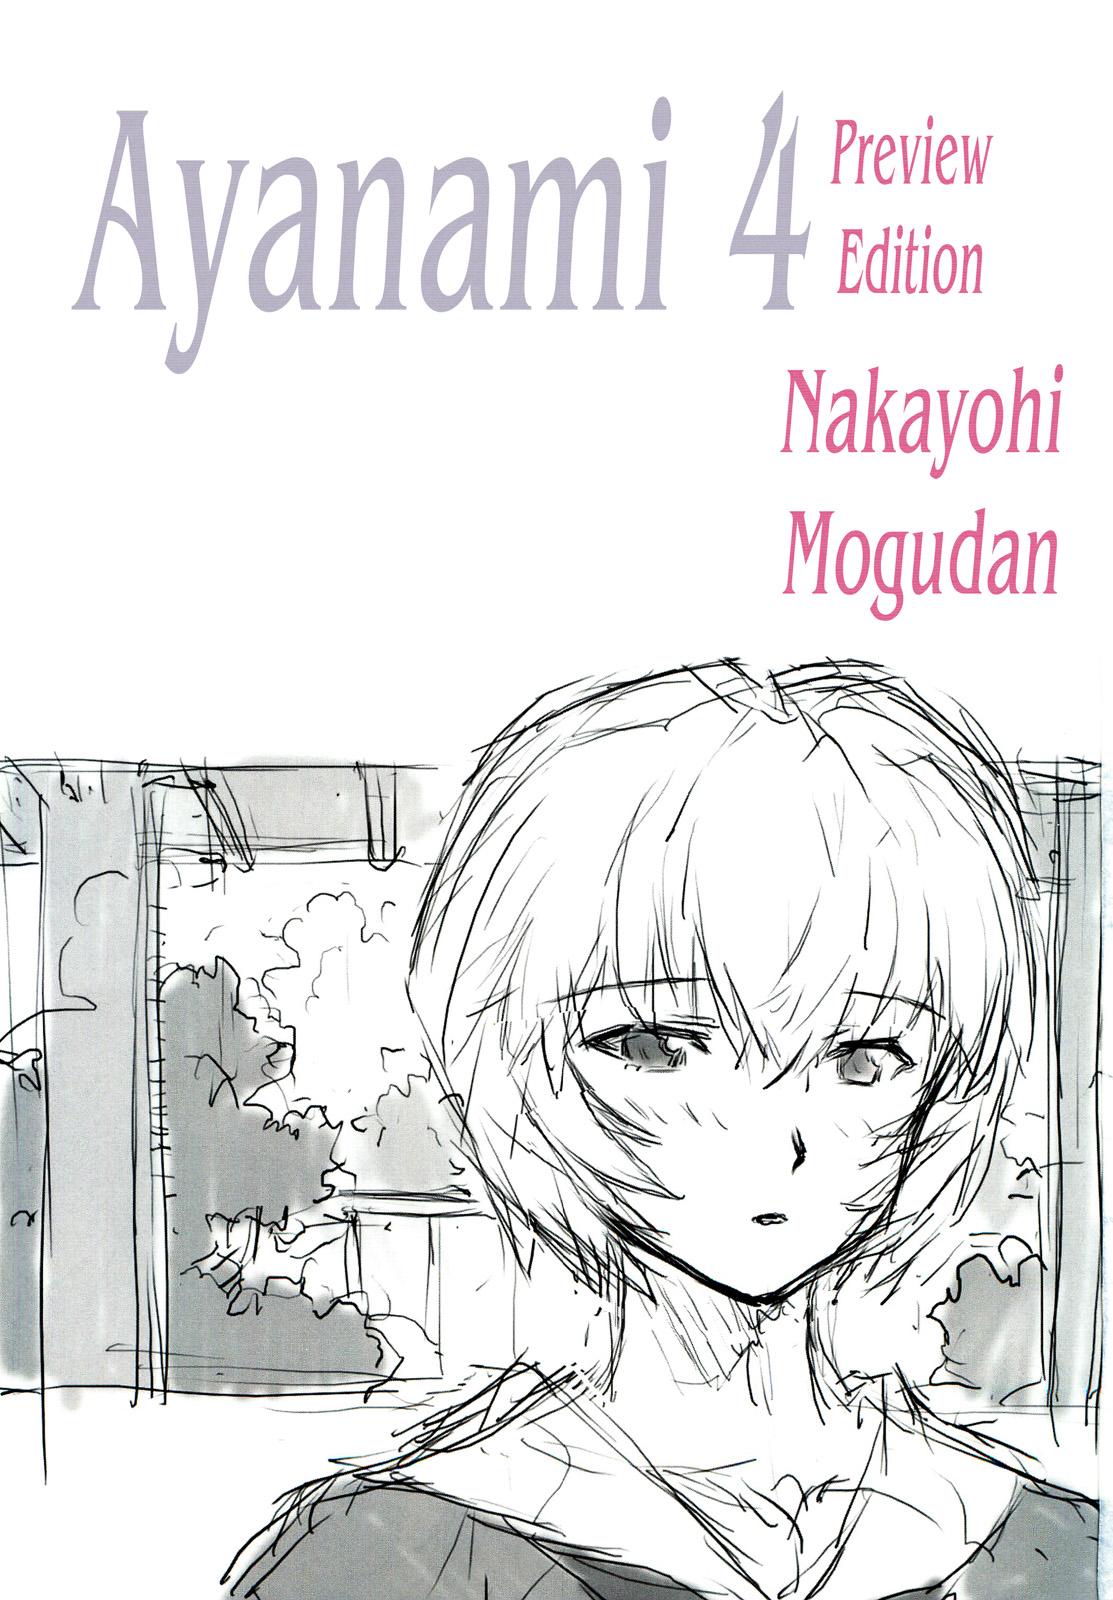 Lesbian Ayanami Dai 4 Kai Pure Han | Ayanami 4 Preview Edition - Neon genesis evangelion Transsexual - Page 3